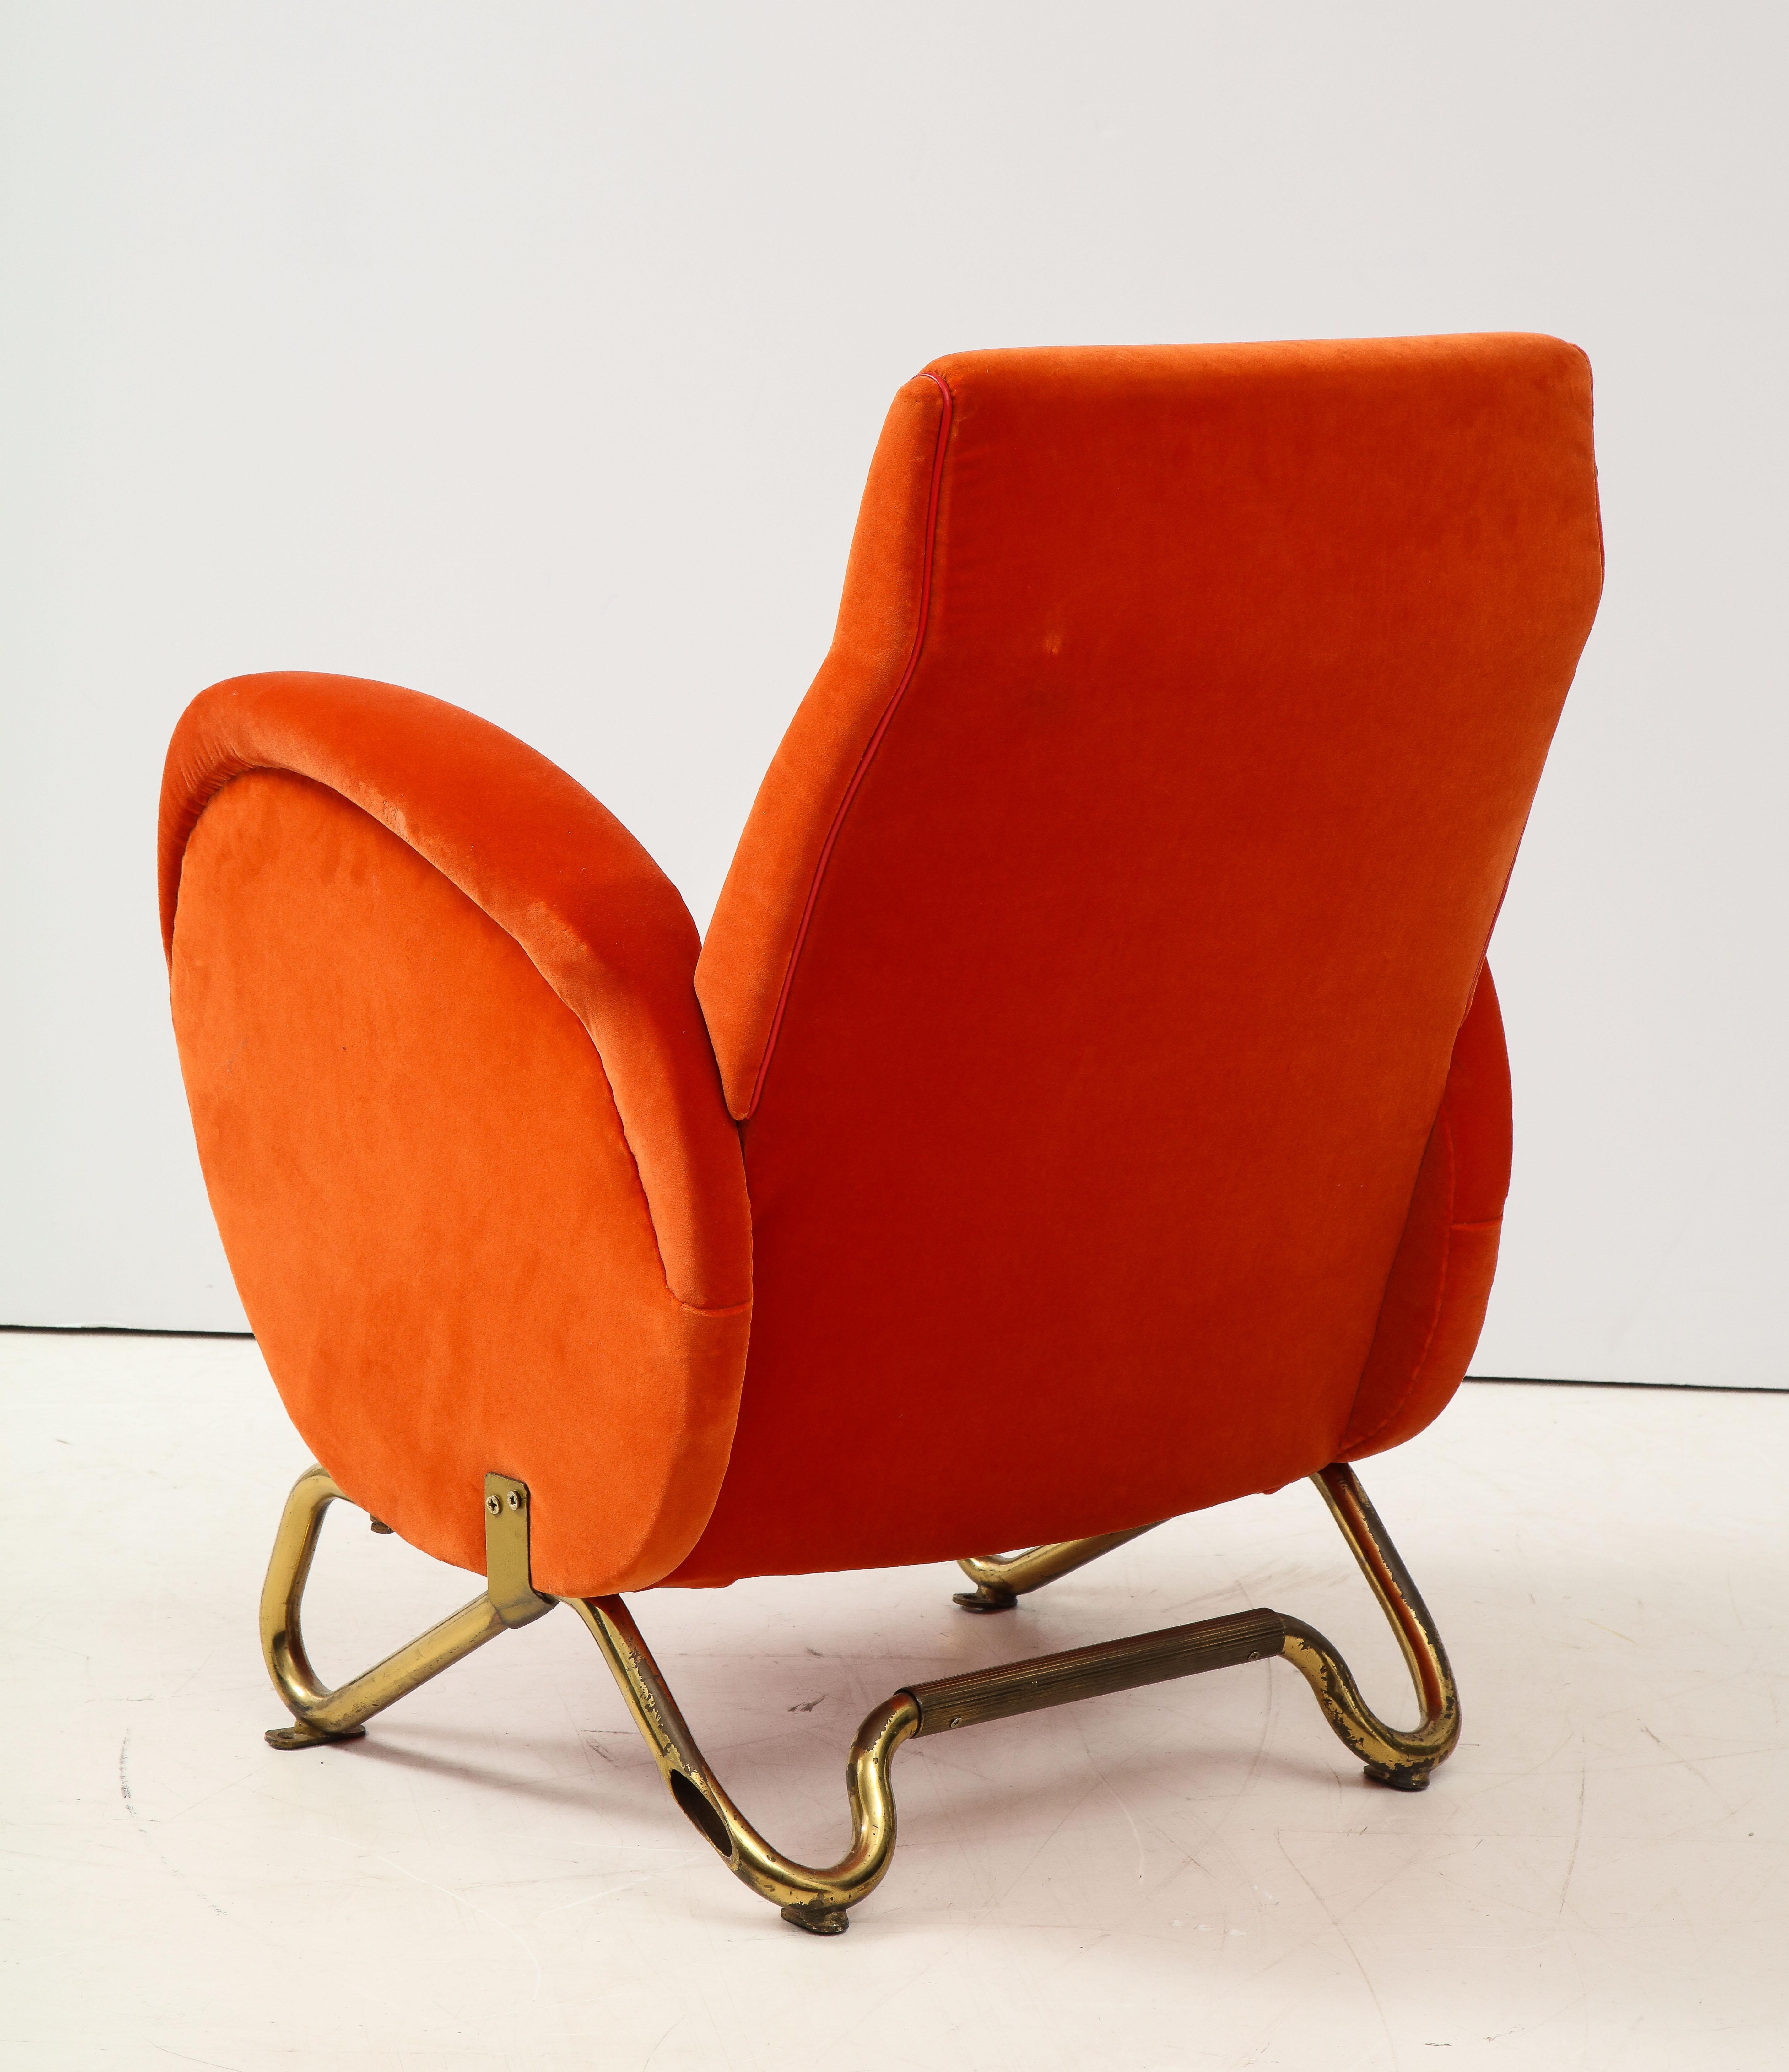 Carlo Mollino, Brass and Velvet Armchair from the RAI Auditorium, Italy, c. 1951 In Good Condition For Sale In New York City, NY